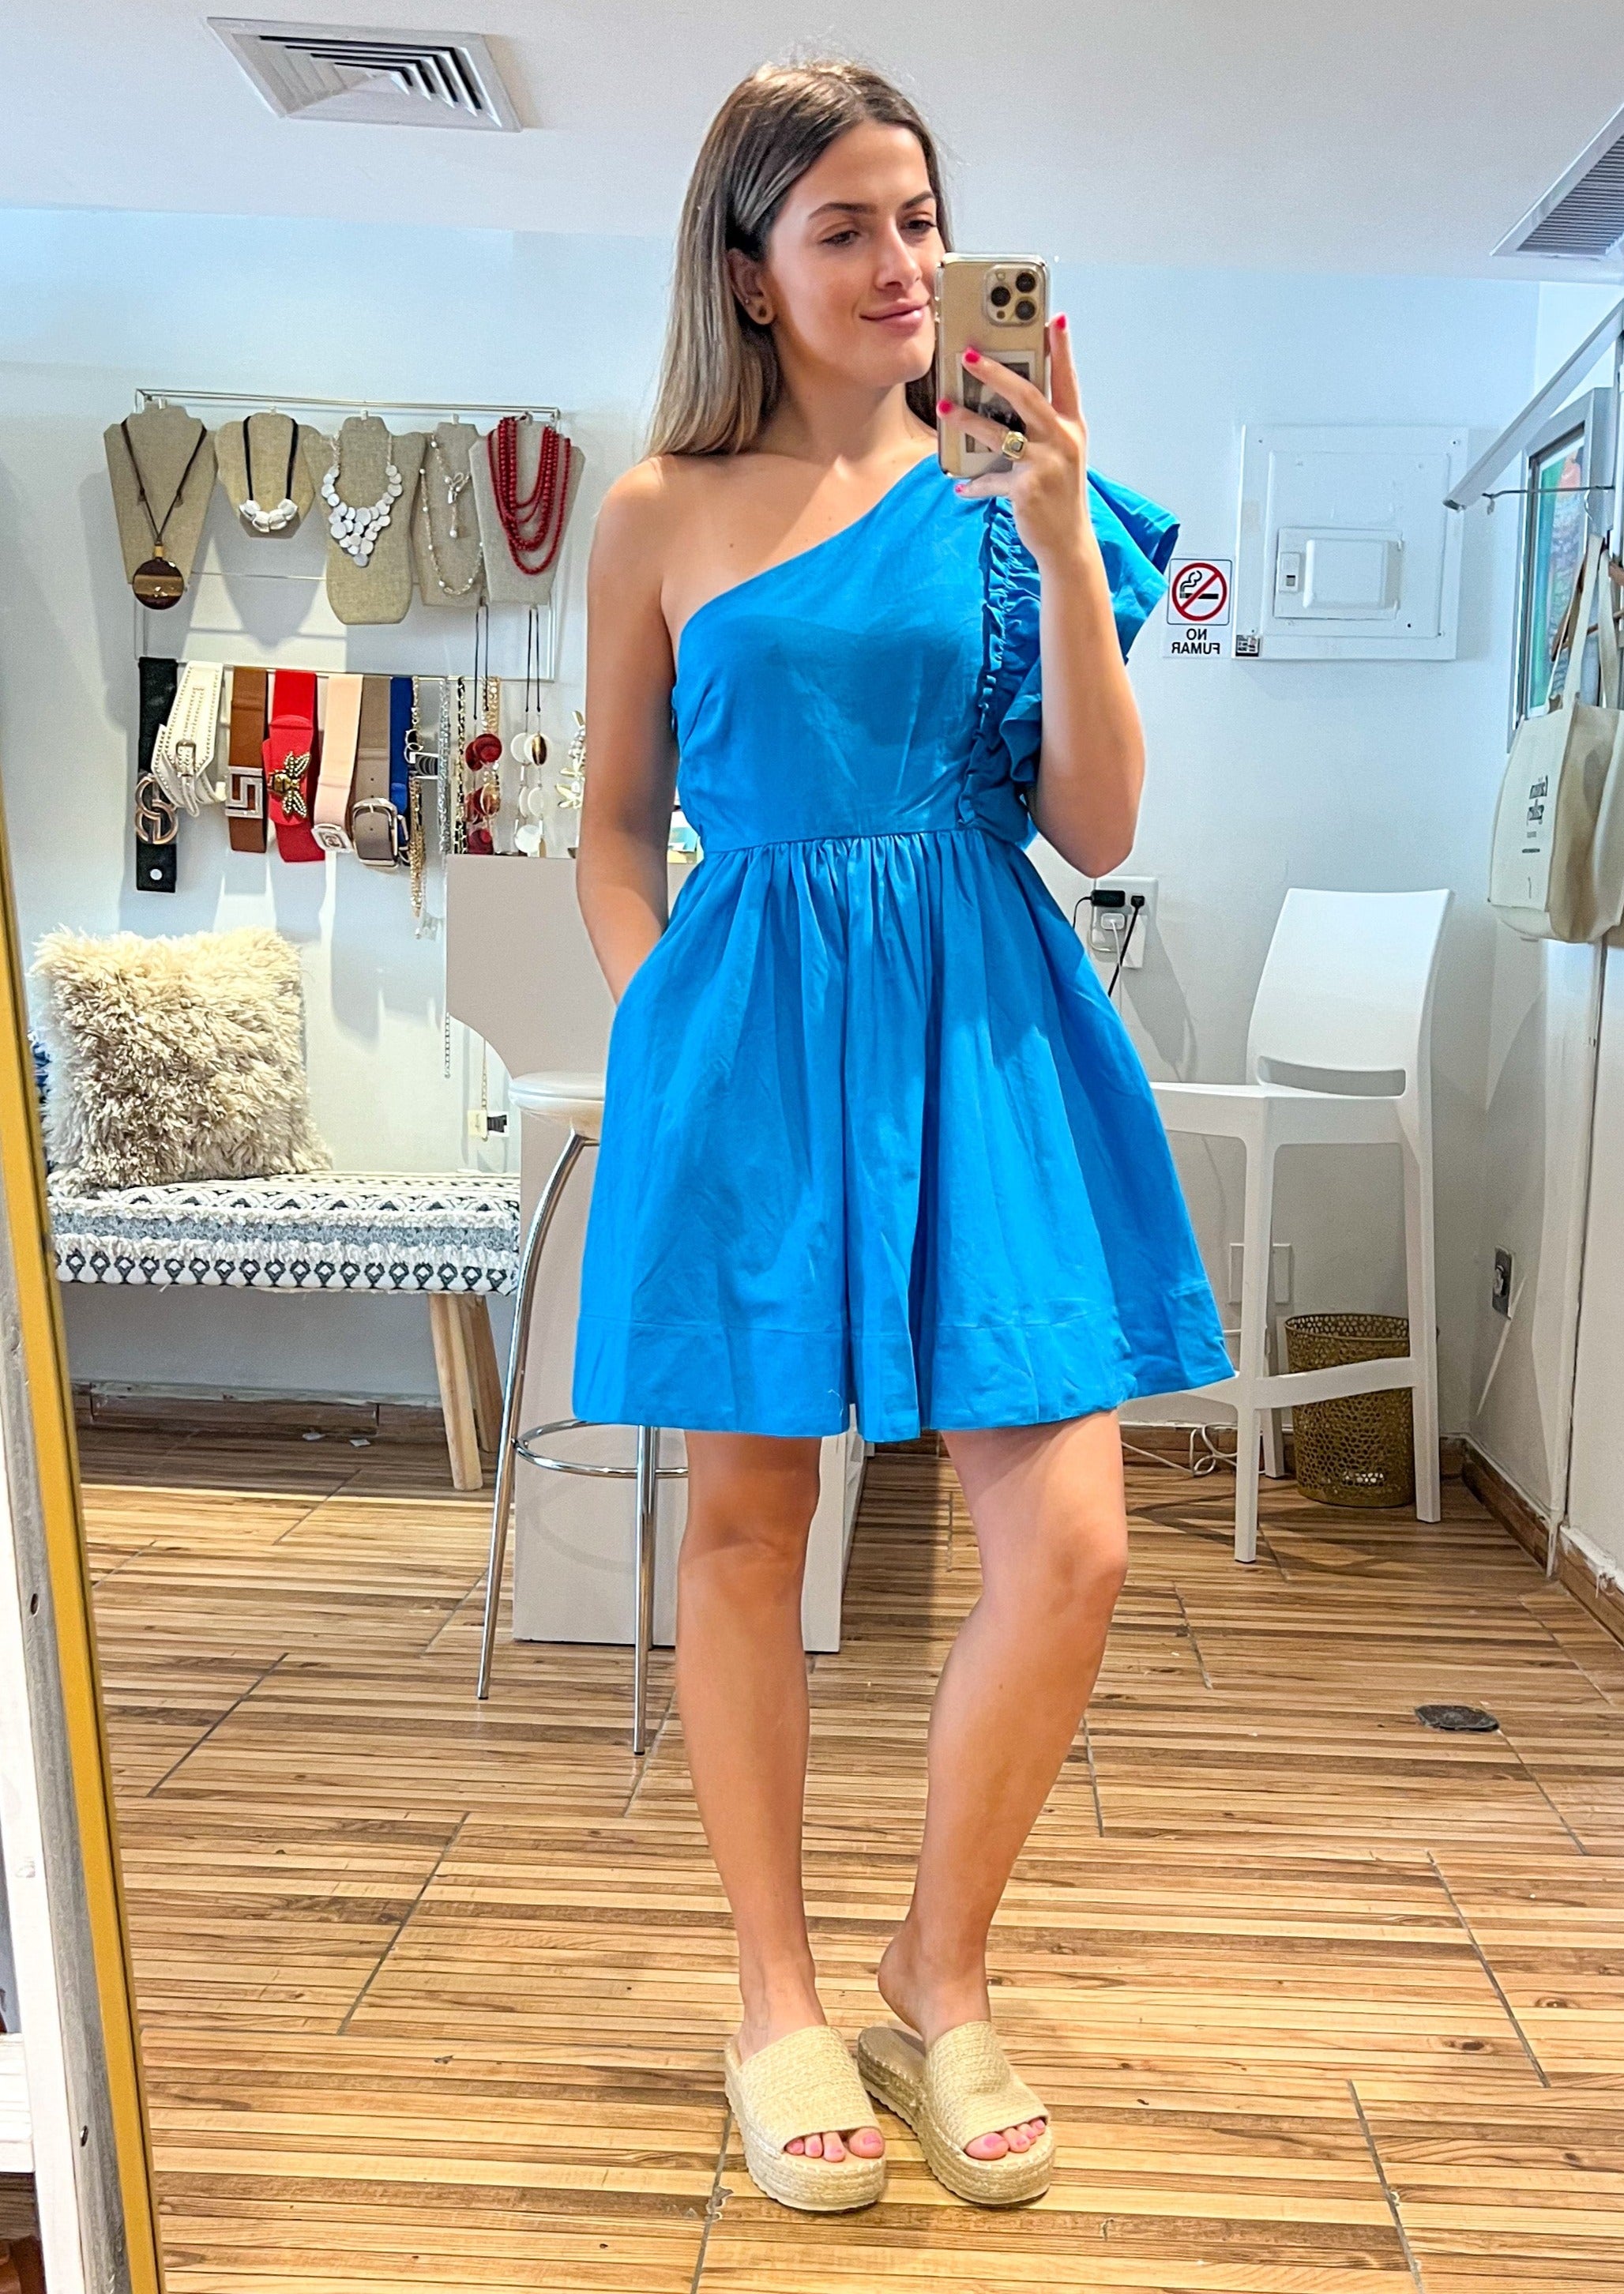 Aqua ruffle one shoulder short dress adjusted at the waist, featured lining and pockets.